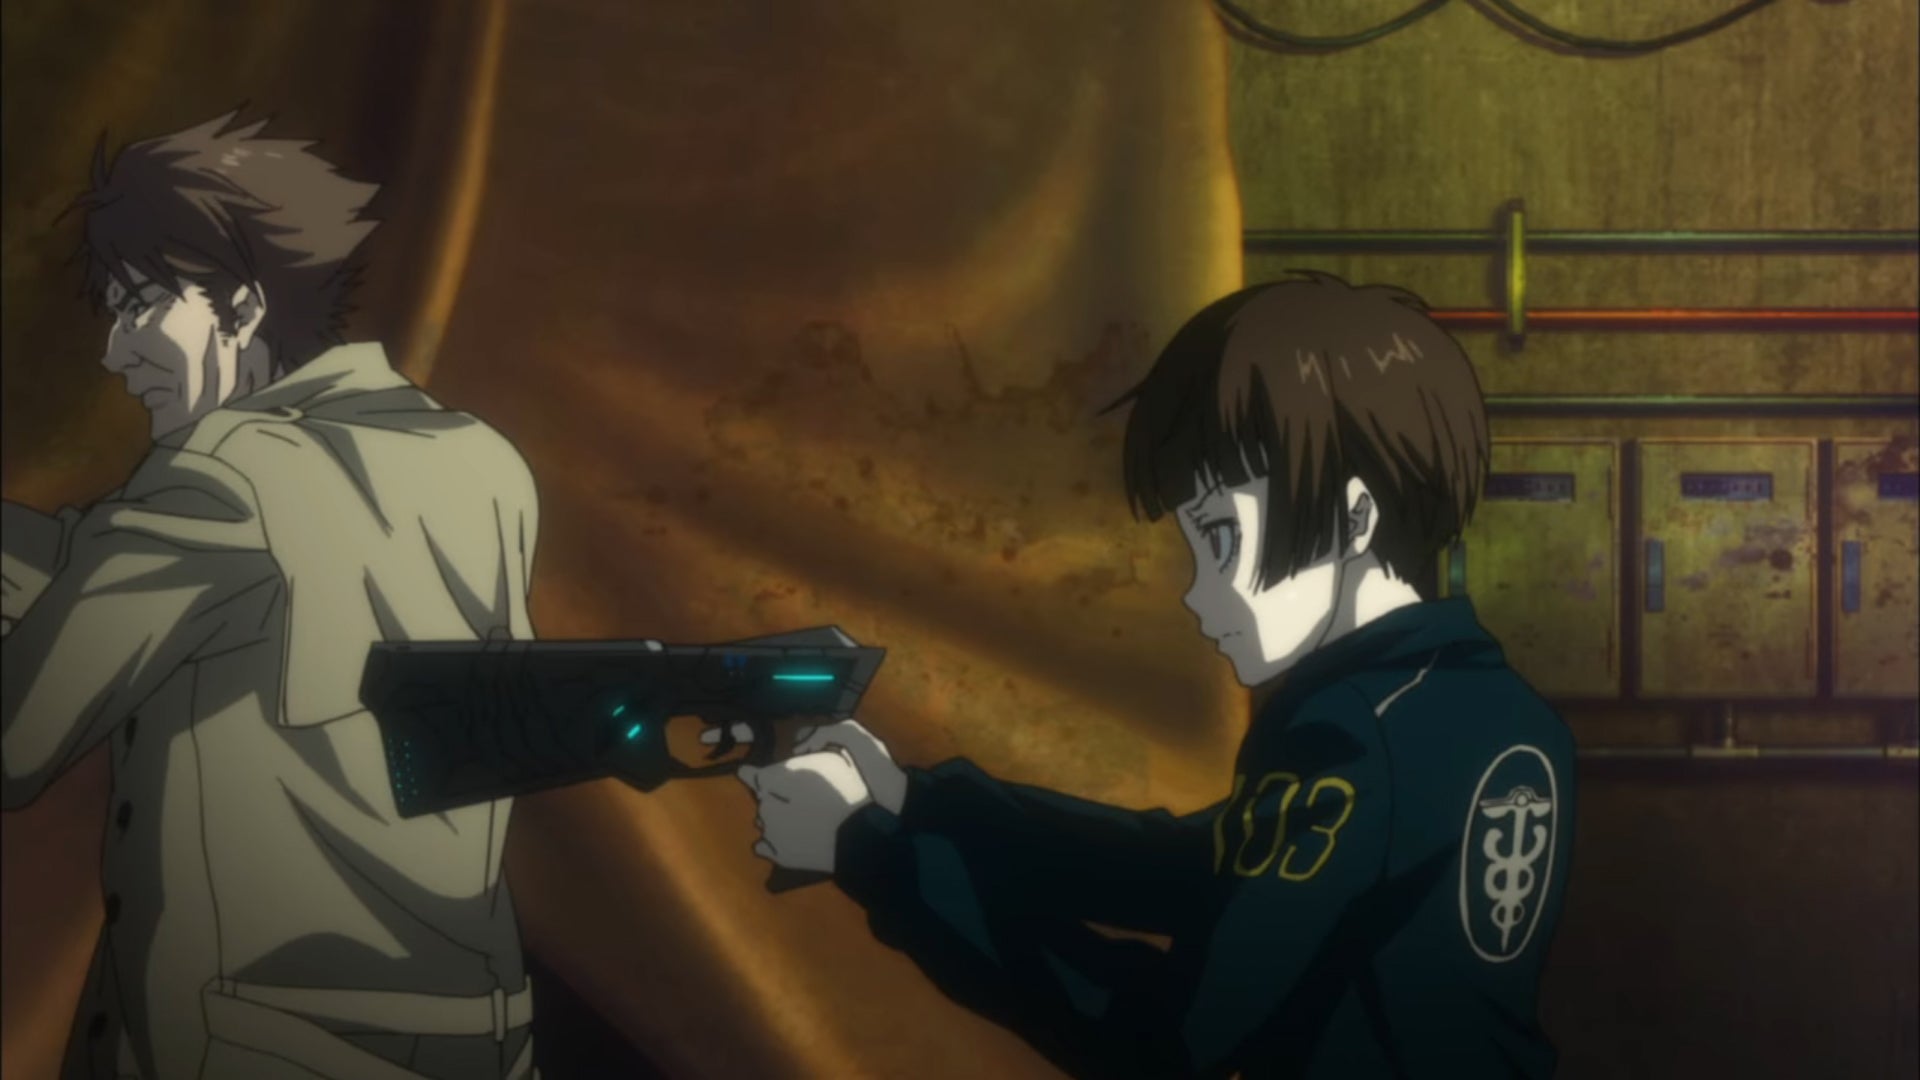 The Dominator weapon from the Gen Urobuchi sci-fi classic, Psycho Pass.